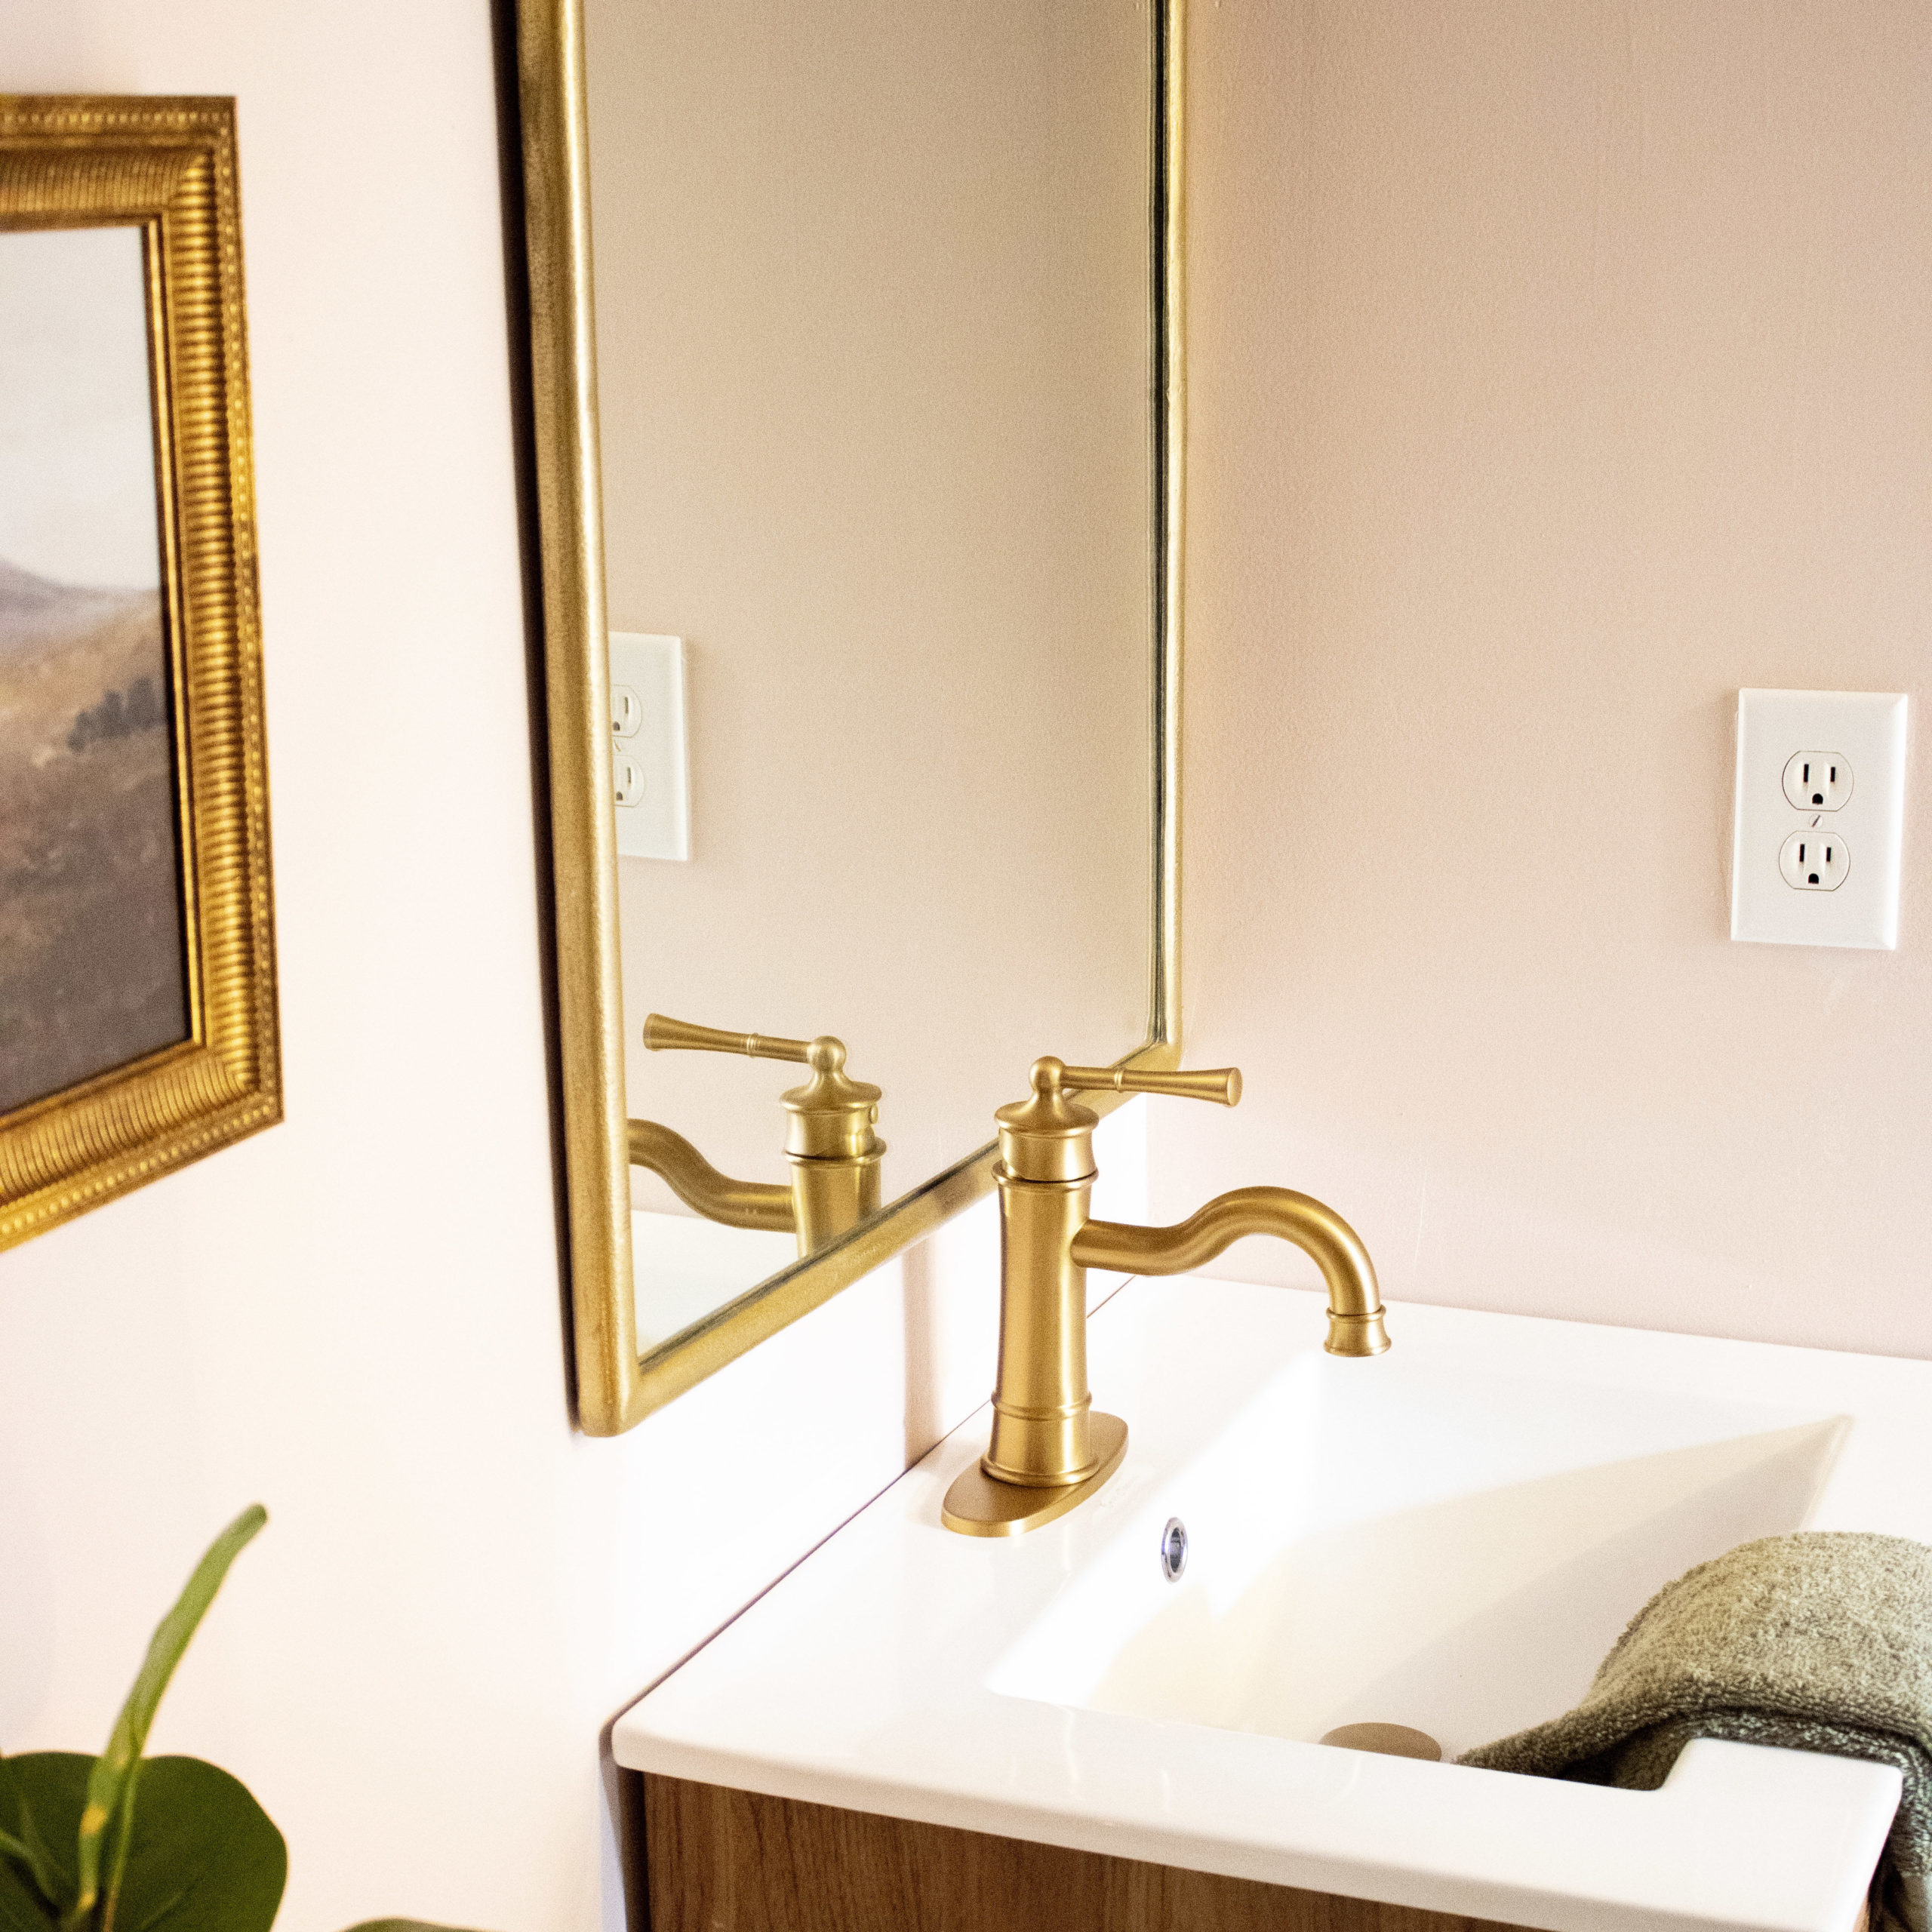 Pink bathroom with a cane and white vanity, gold faucet, and vintage style mirror.